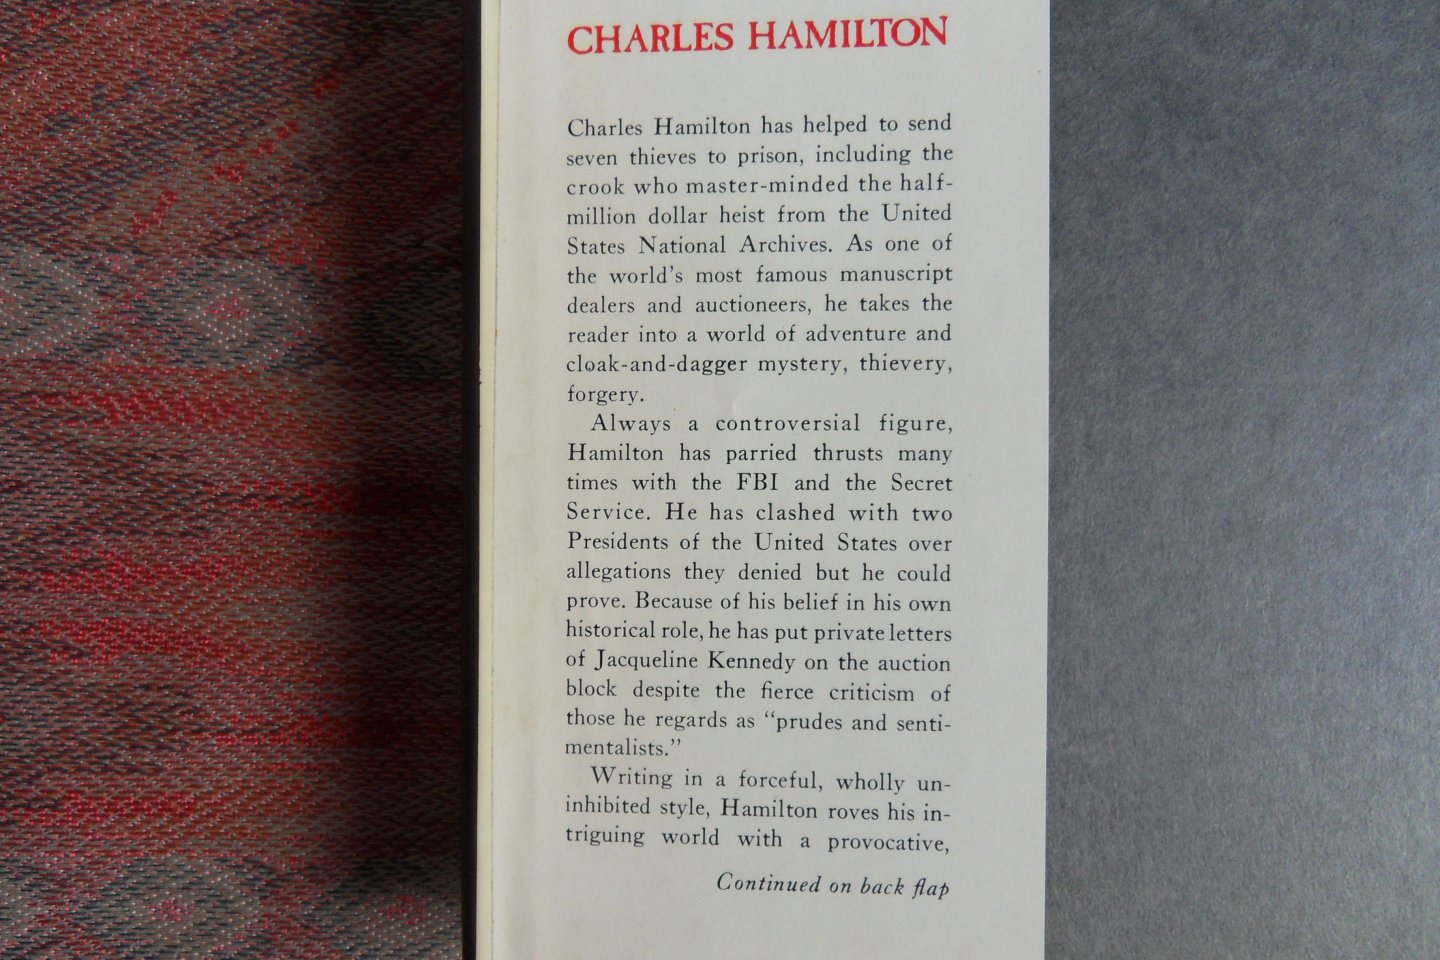 Hamilton, Charles. - Scribblers & Scoundrels. - A Famous Manuscript Dealer and Auctioneer Recounts His Personal Experiences in the Exciting World of Autograph and Manuscript Collecting.